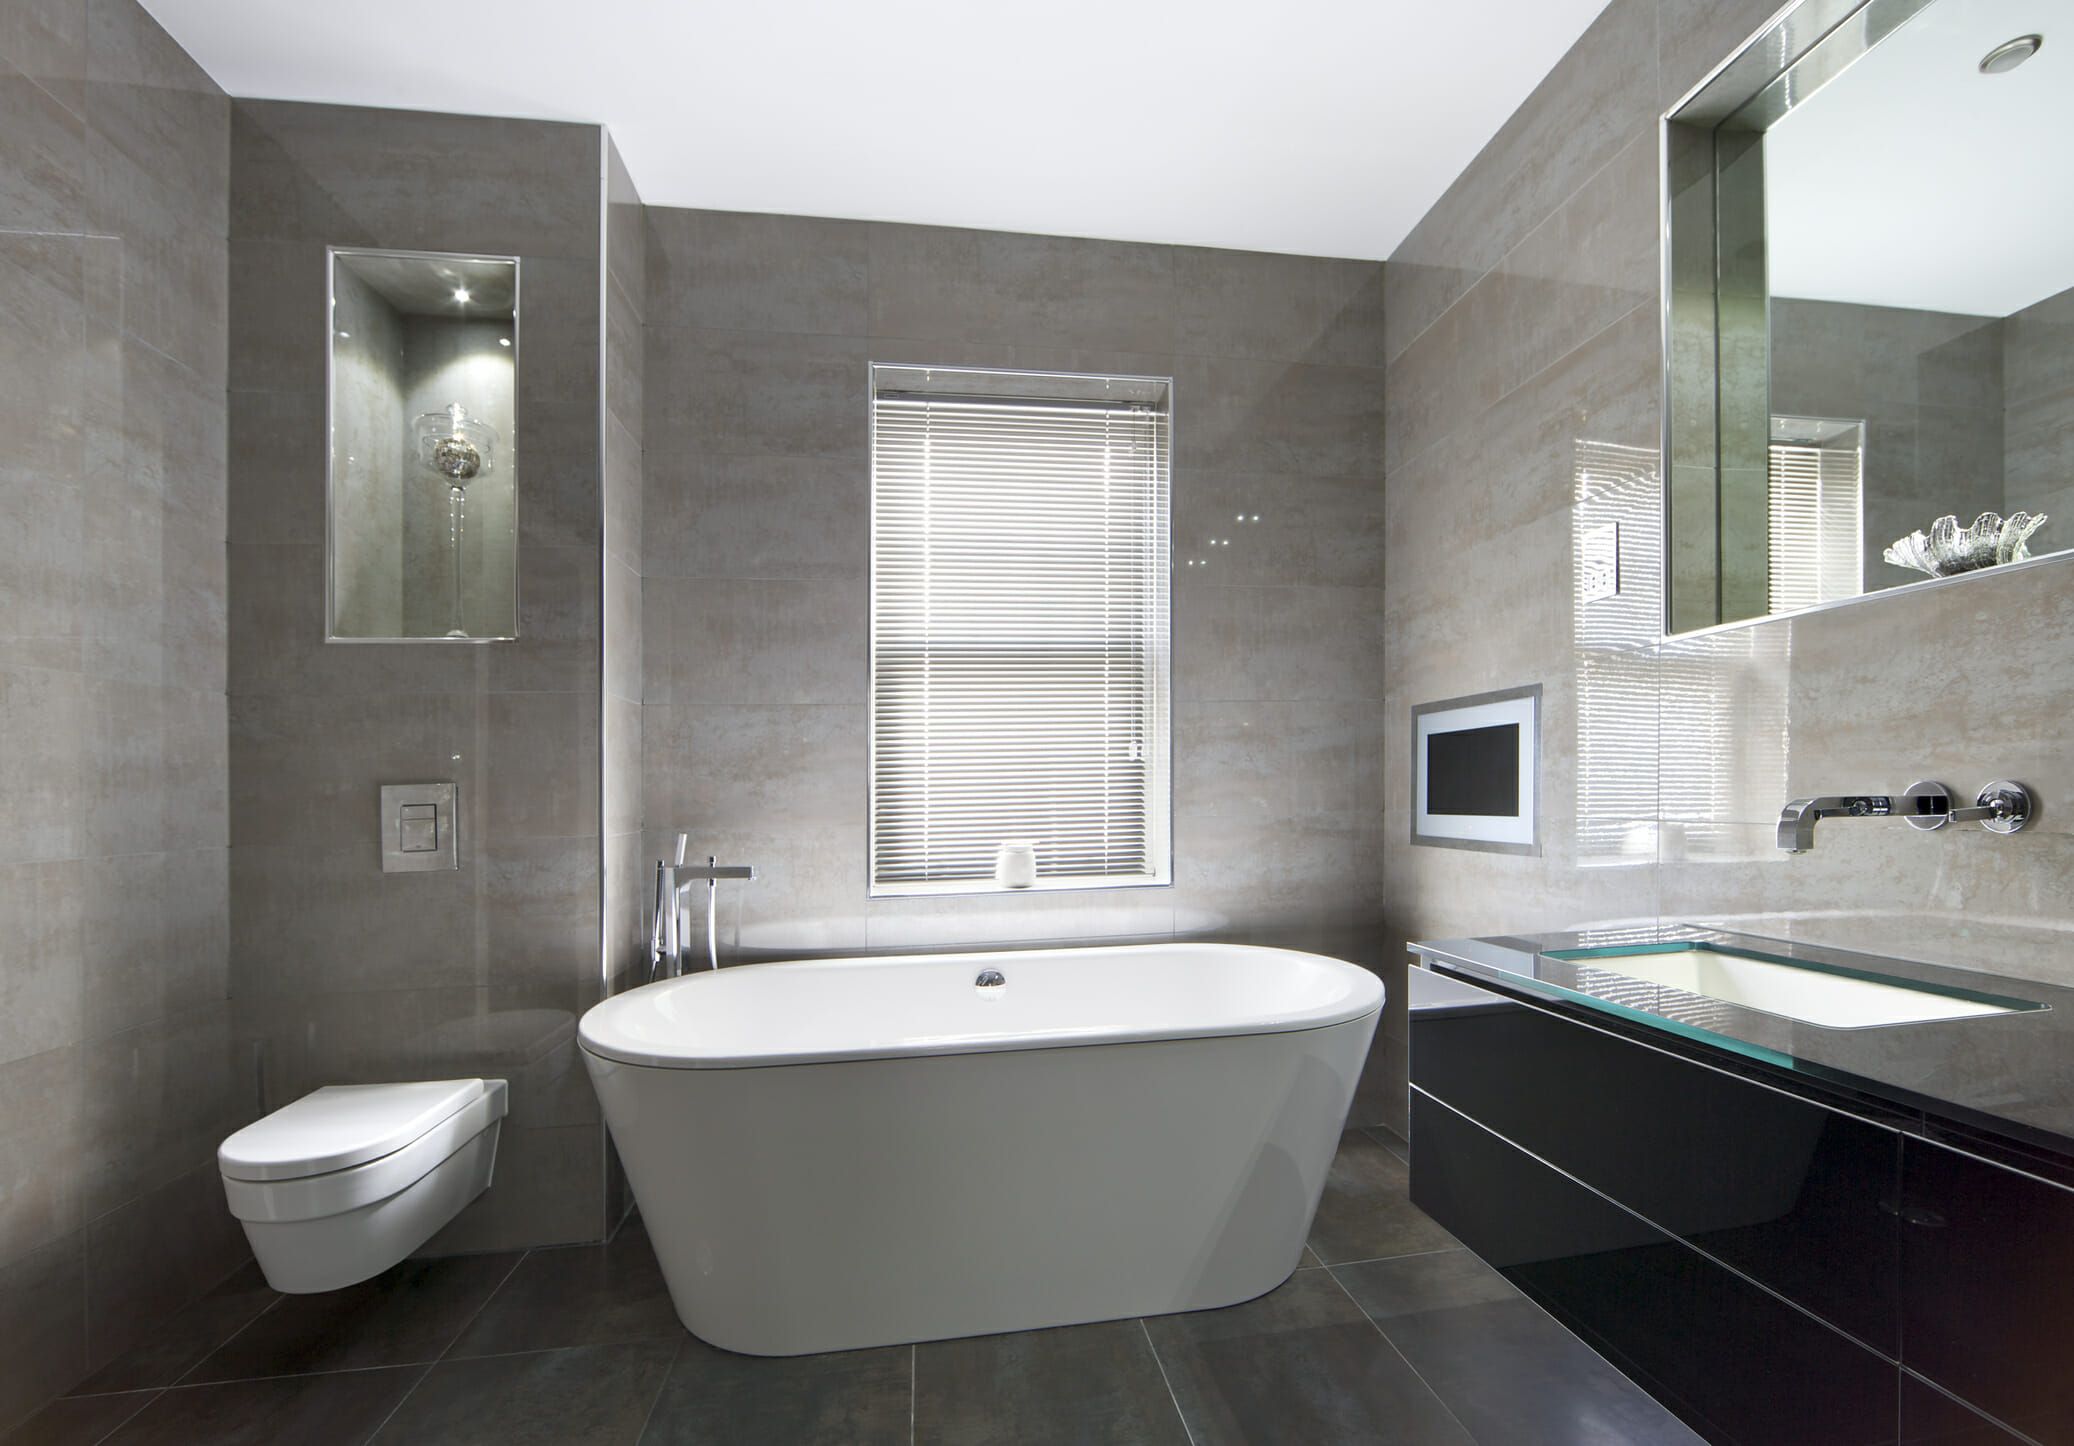 How to Design a Small Bathroom to Look More Spacious